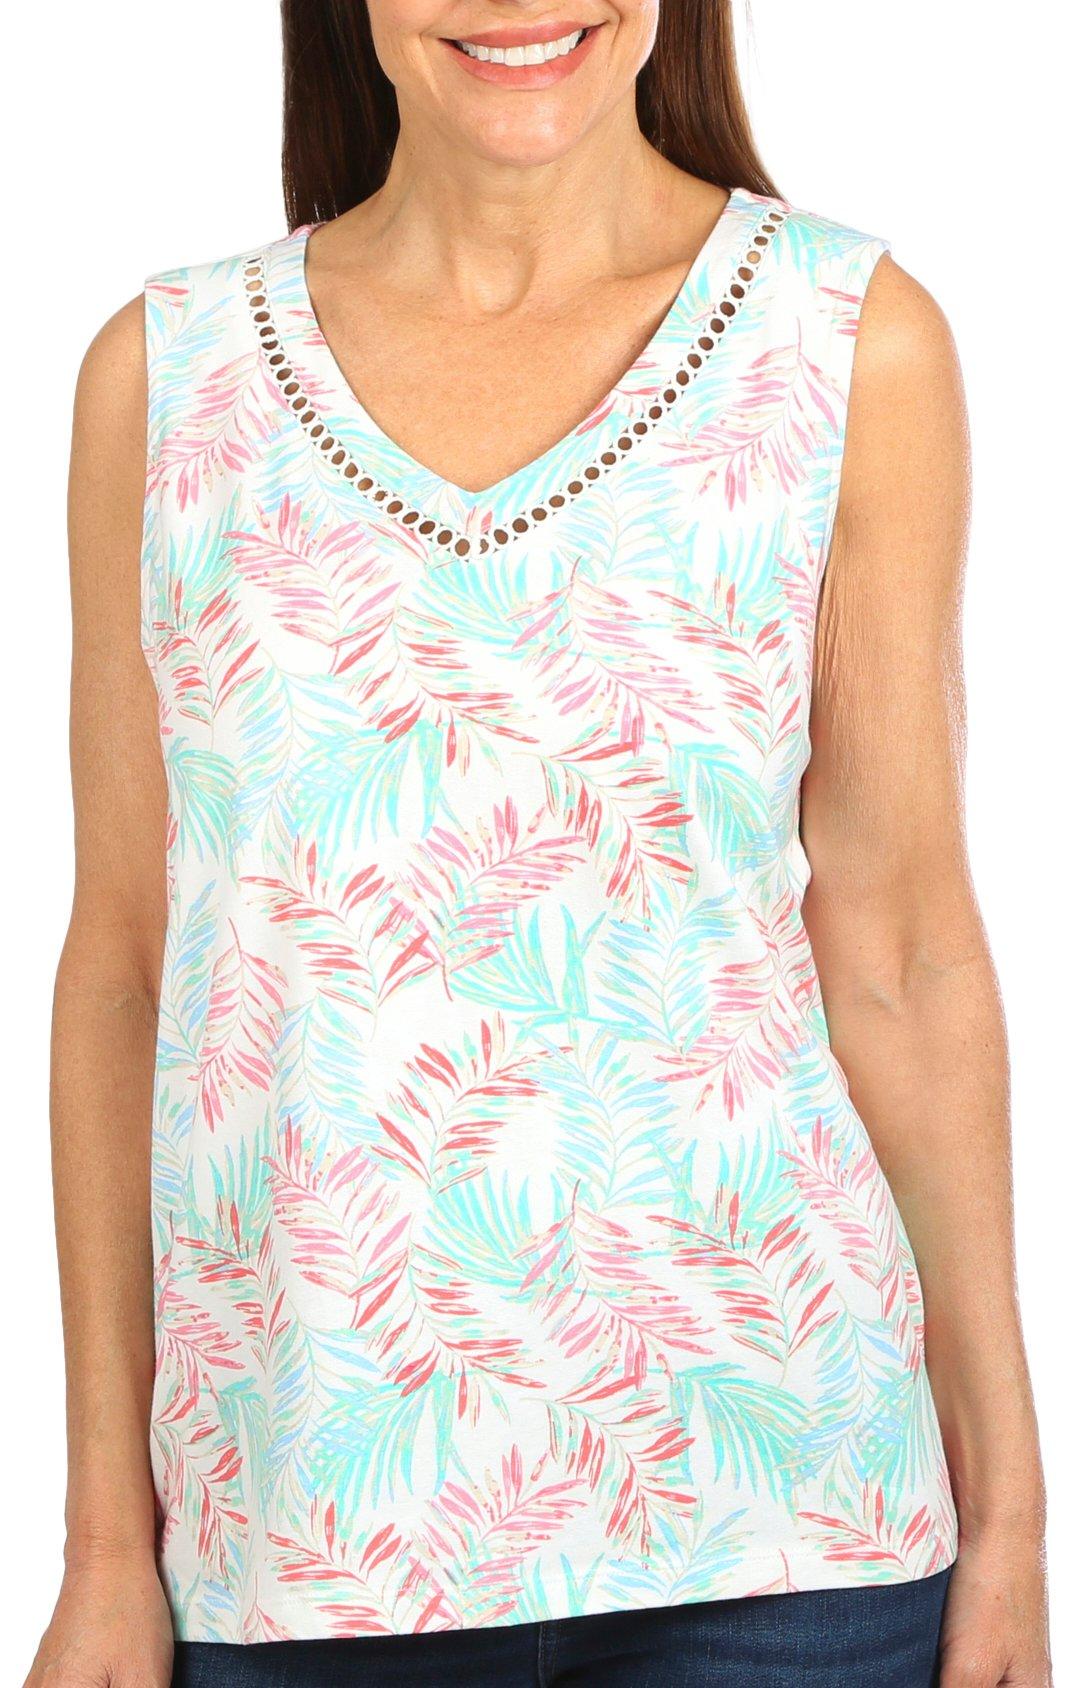 Coral Bay Womens Fronds Print Crochet Sleeveless Top